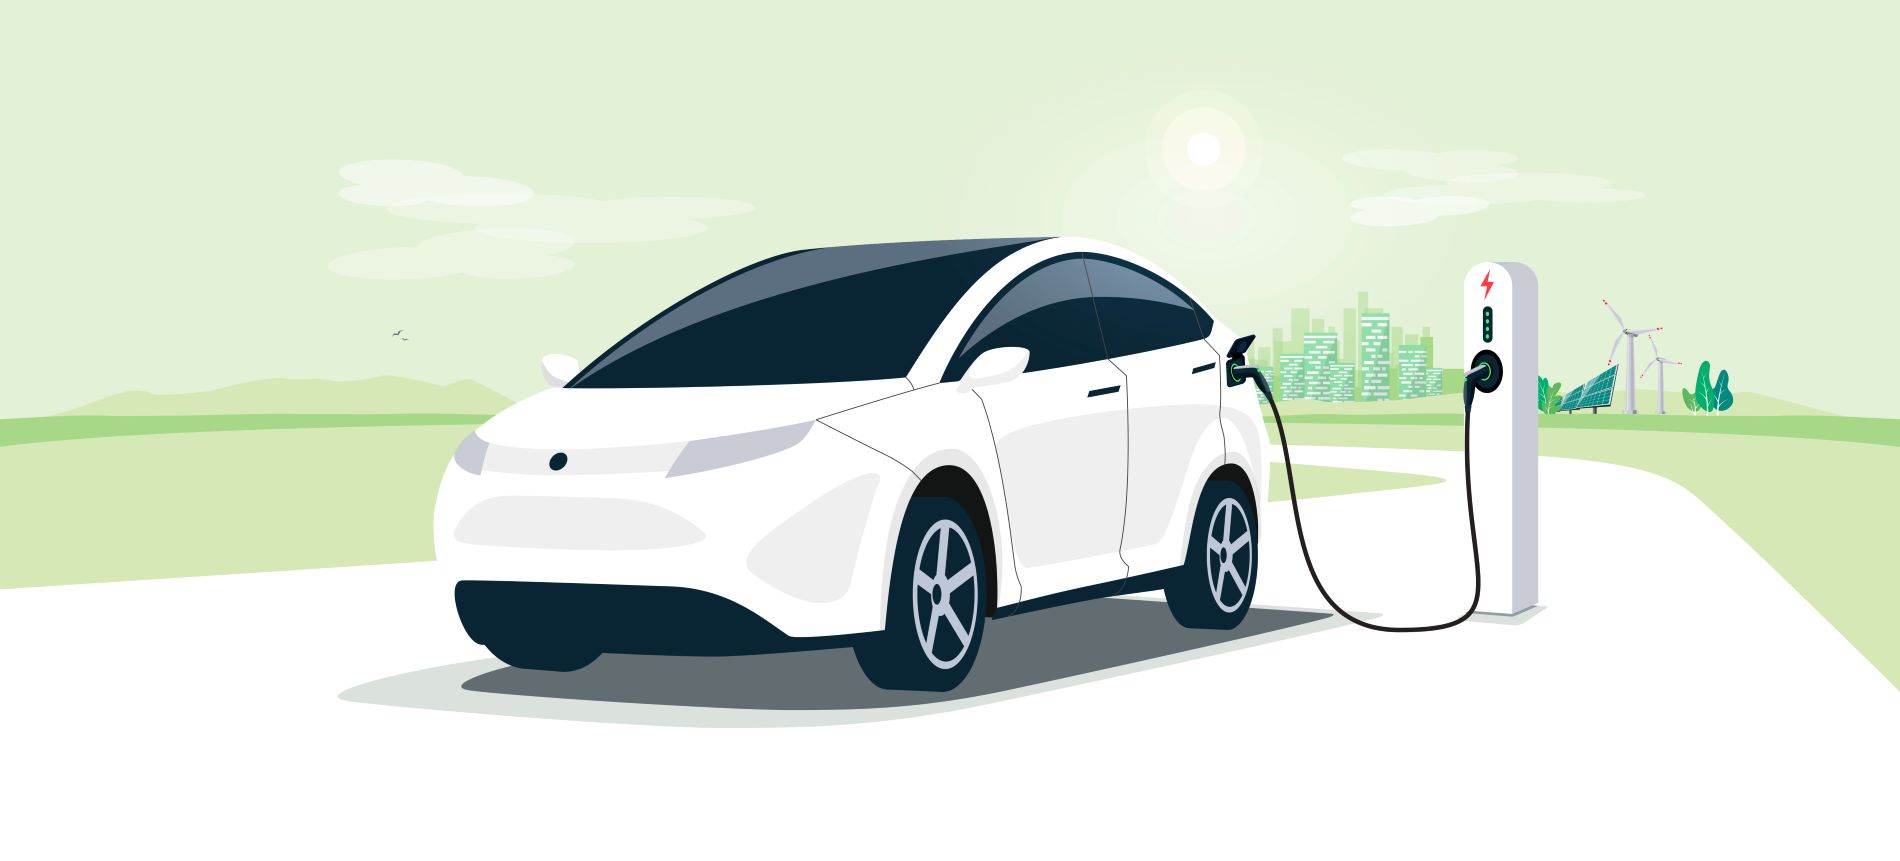 How Do Electric Cars Work?